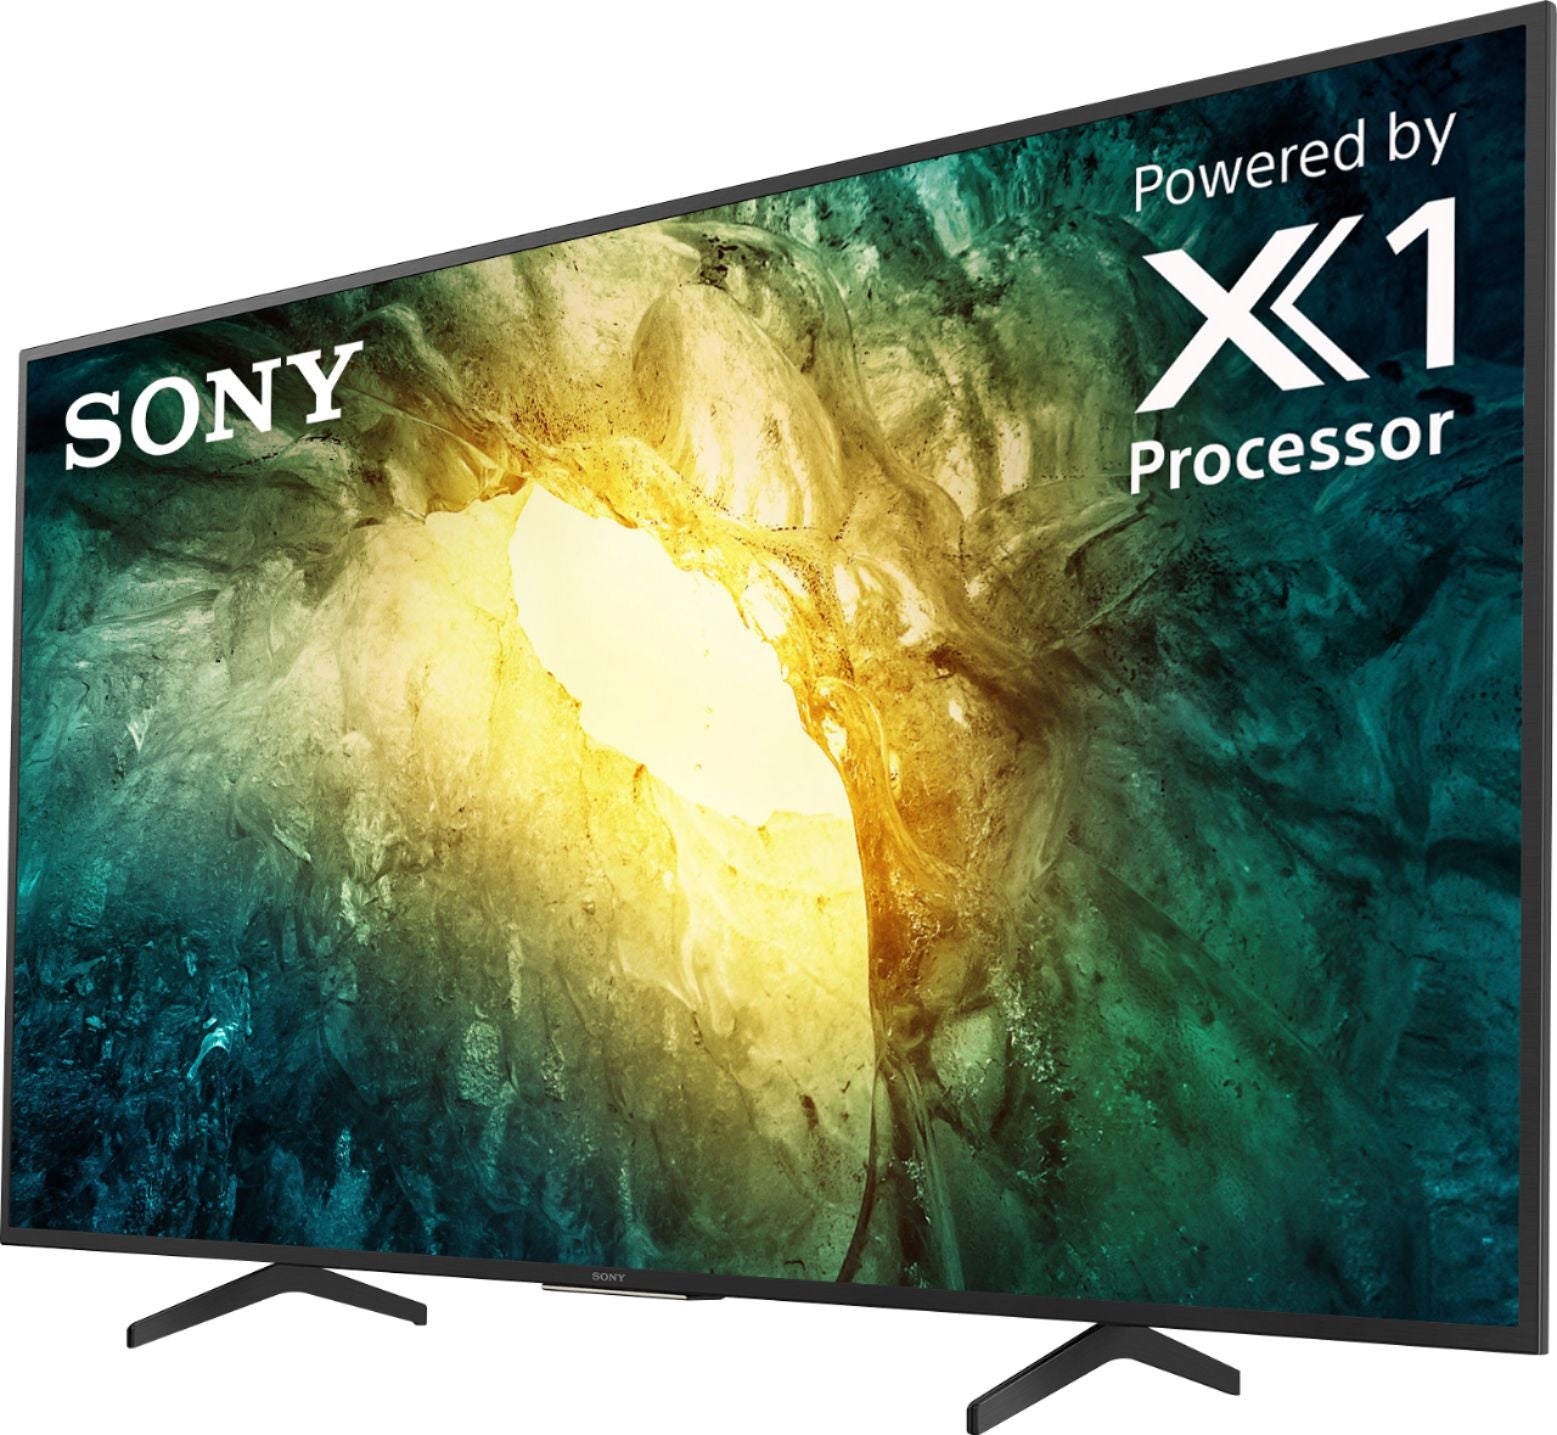 Sony 55" Class X750H Series LED 4K UHD Smart Android TV(Refurbished)